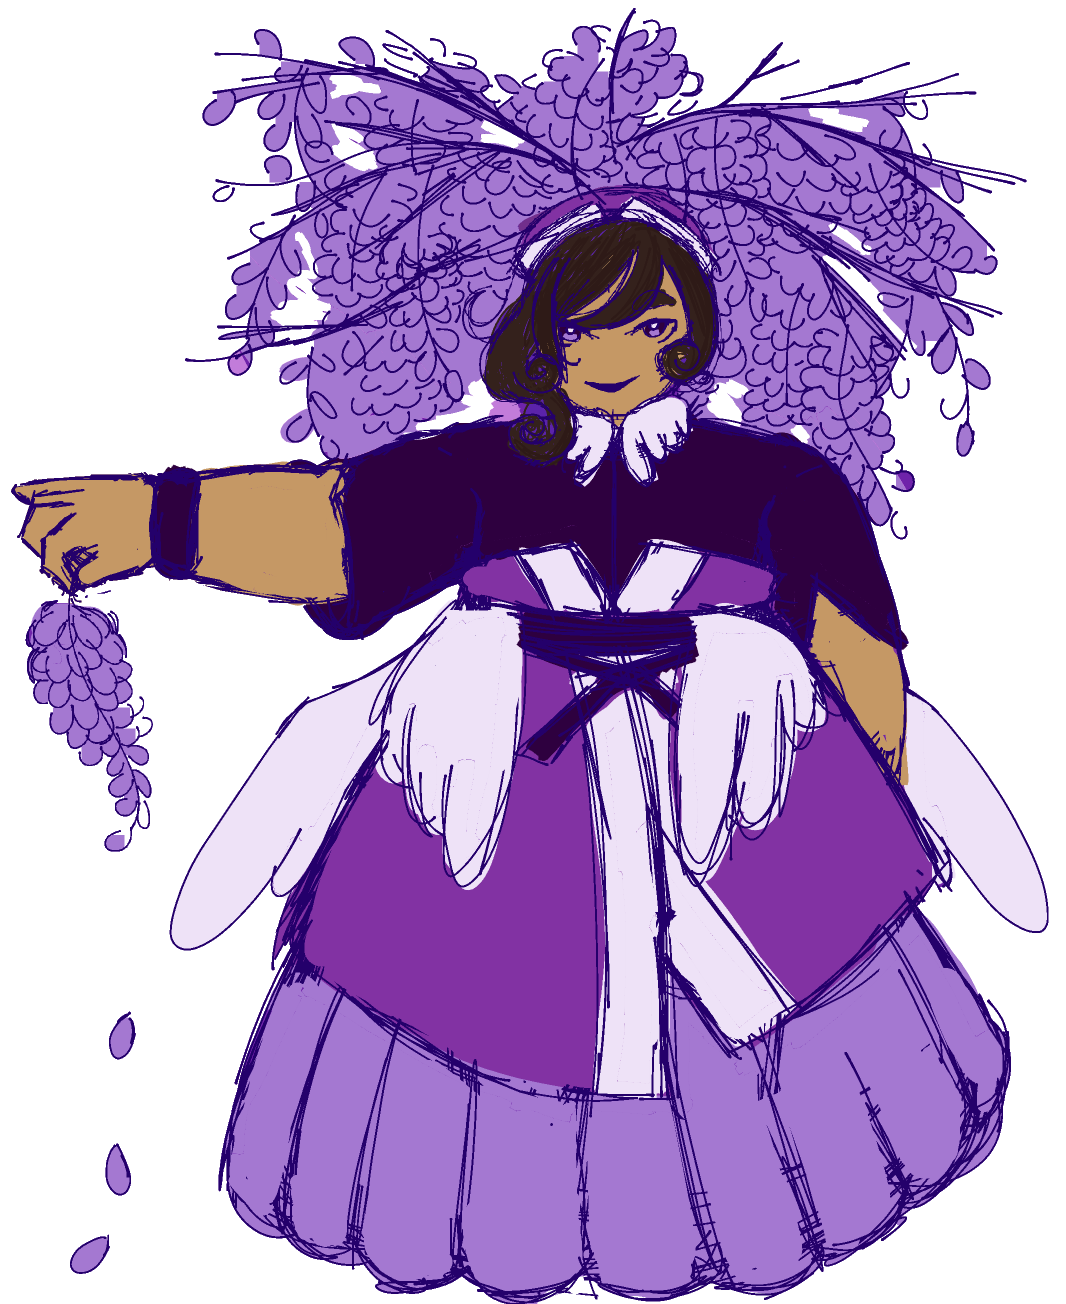 a sketch of Wisteria dangling a bunch of wisteria flowers.